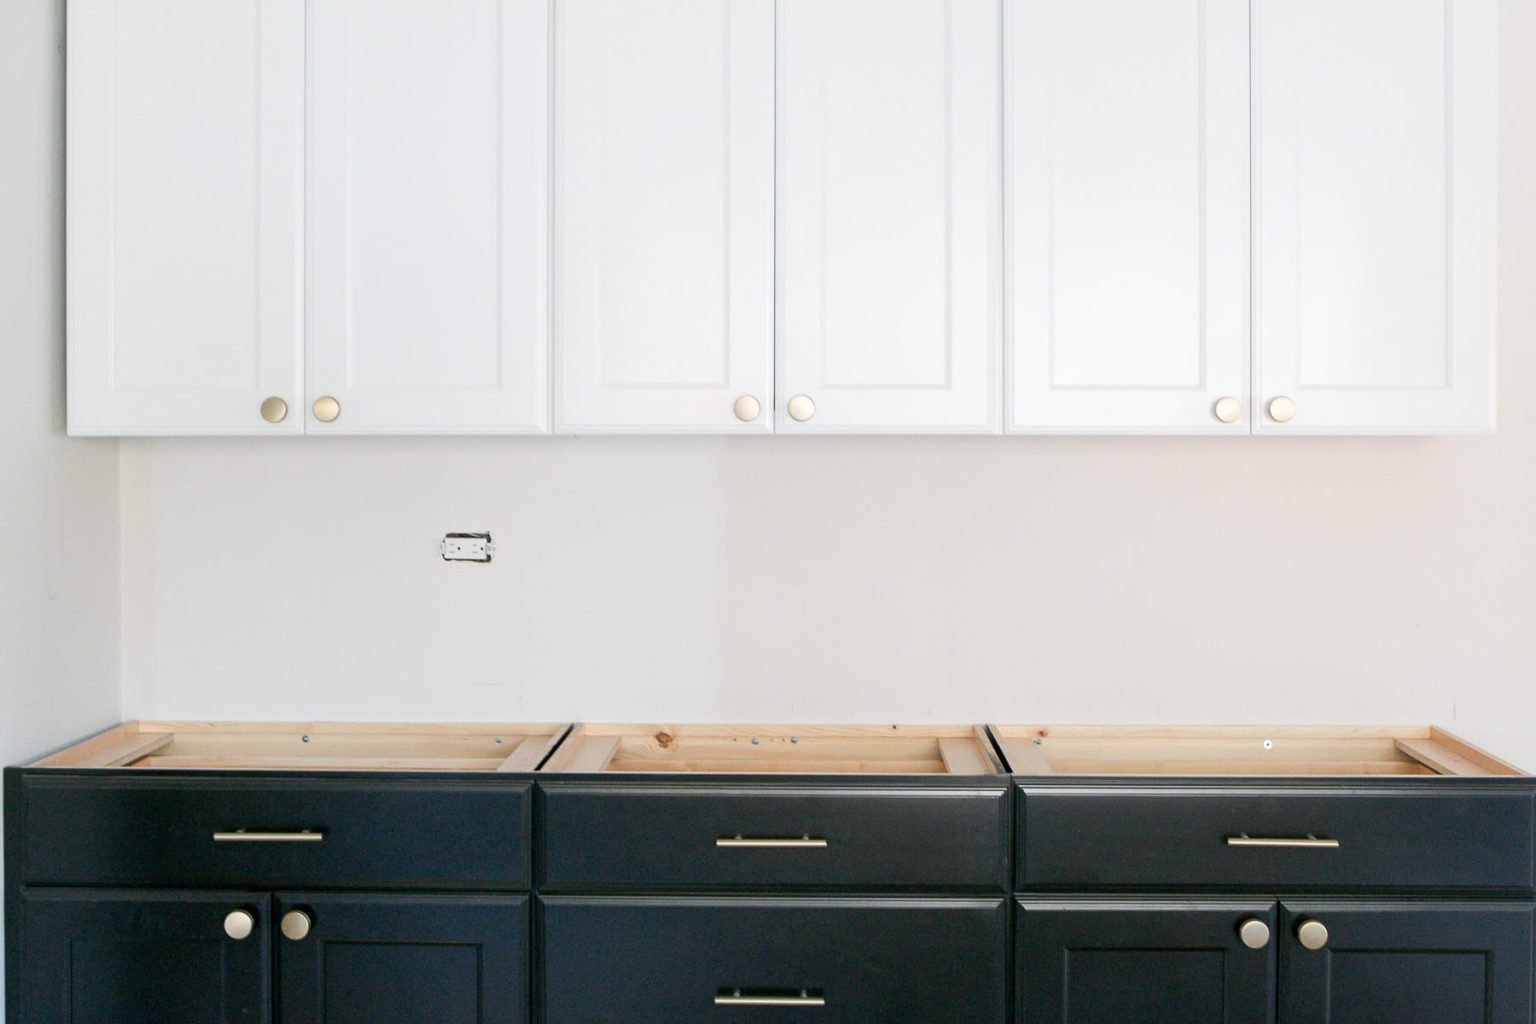 Lowe's Kitchen Cabinets: Colors, Size, + Cost | The DIY Playbook